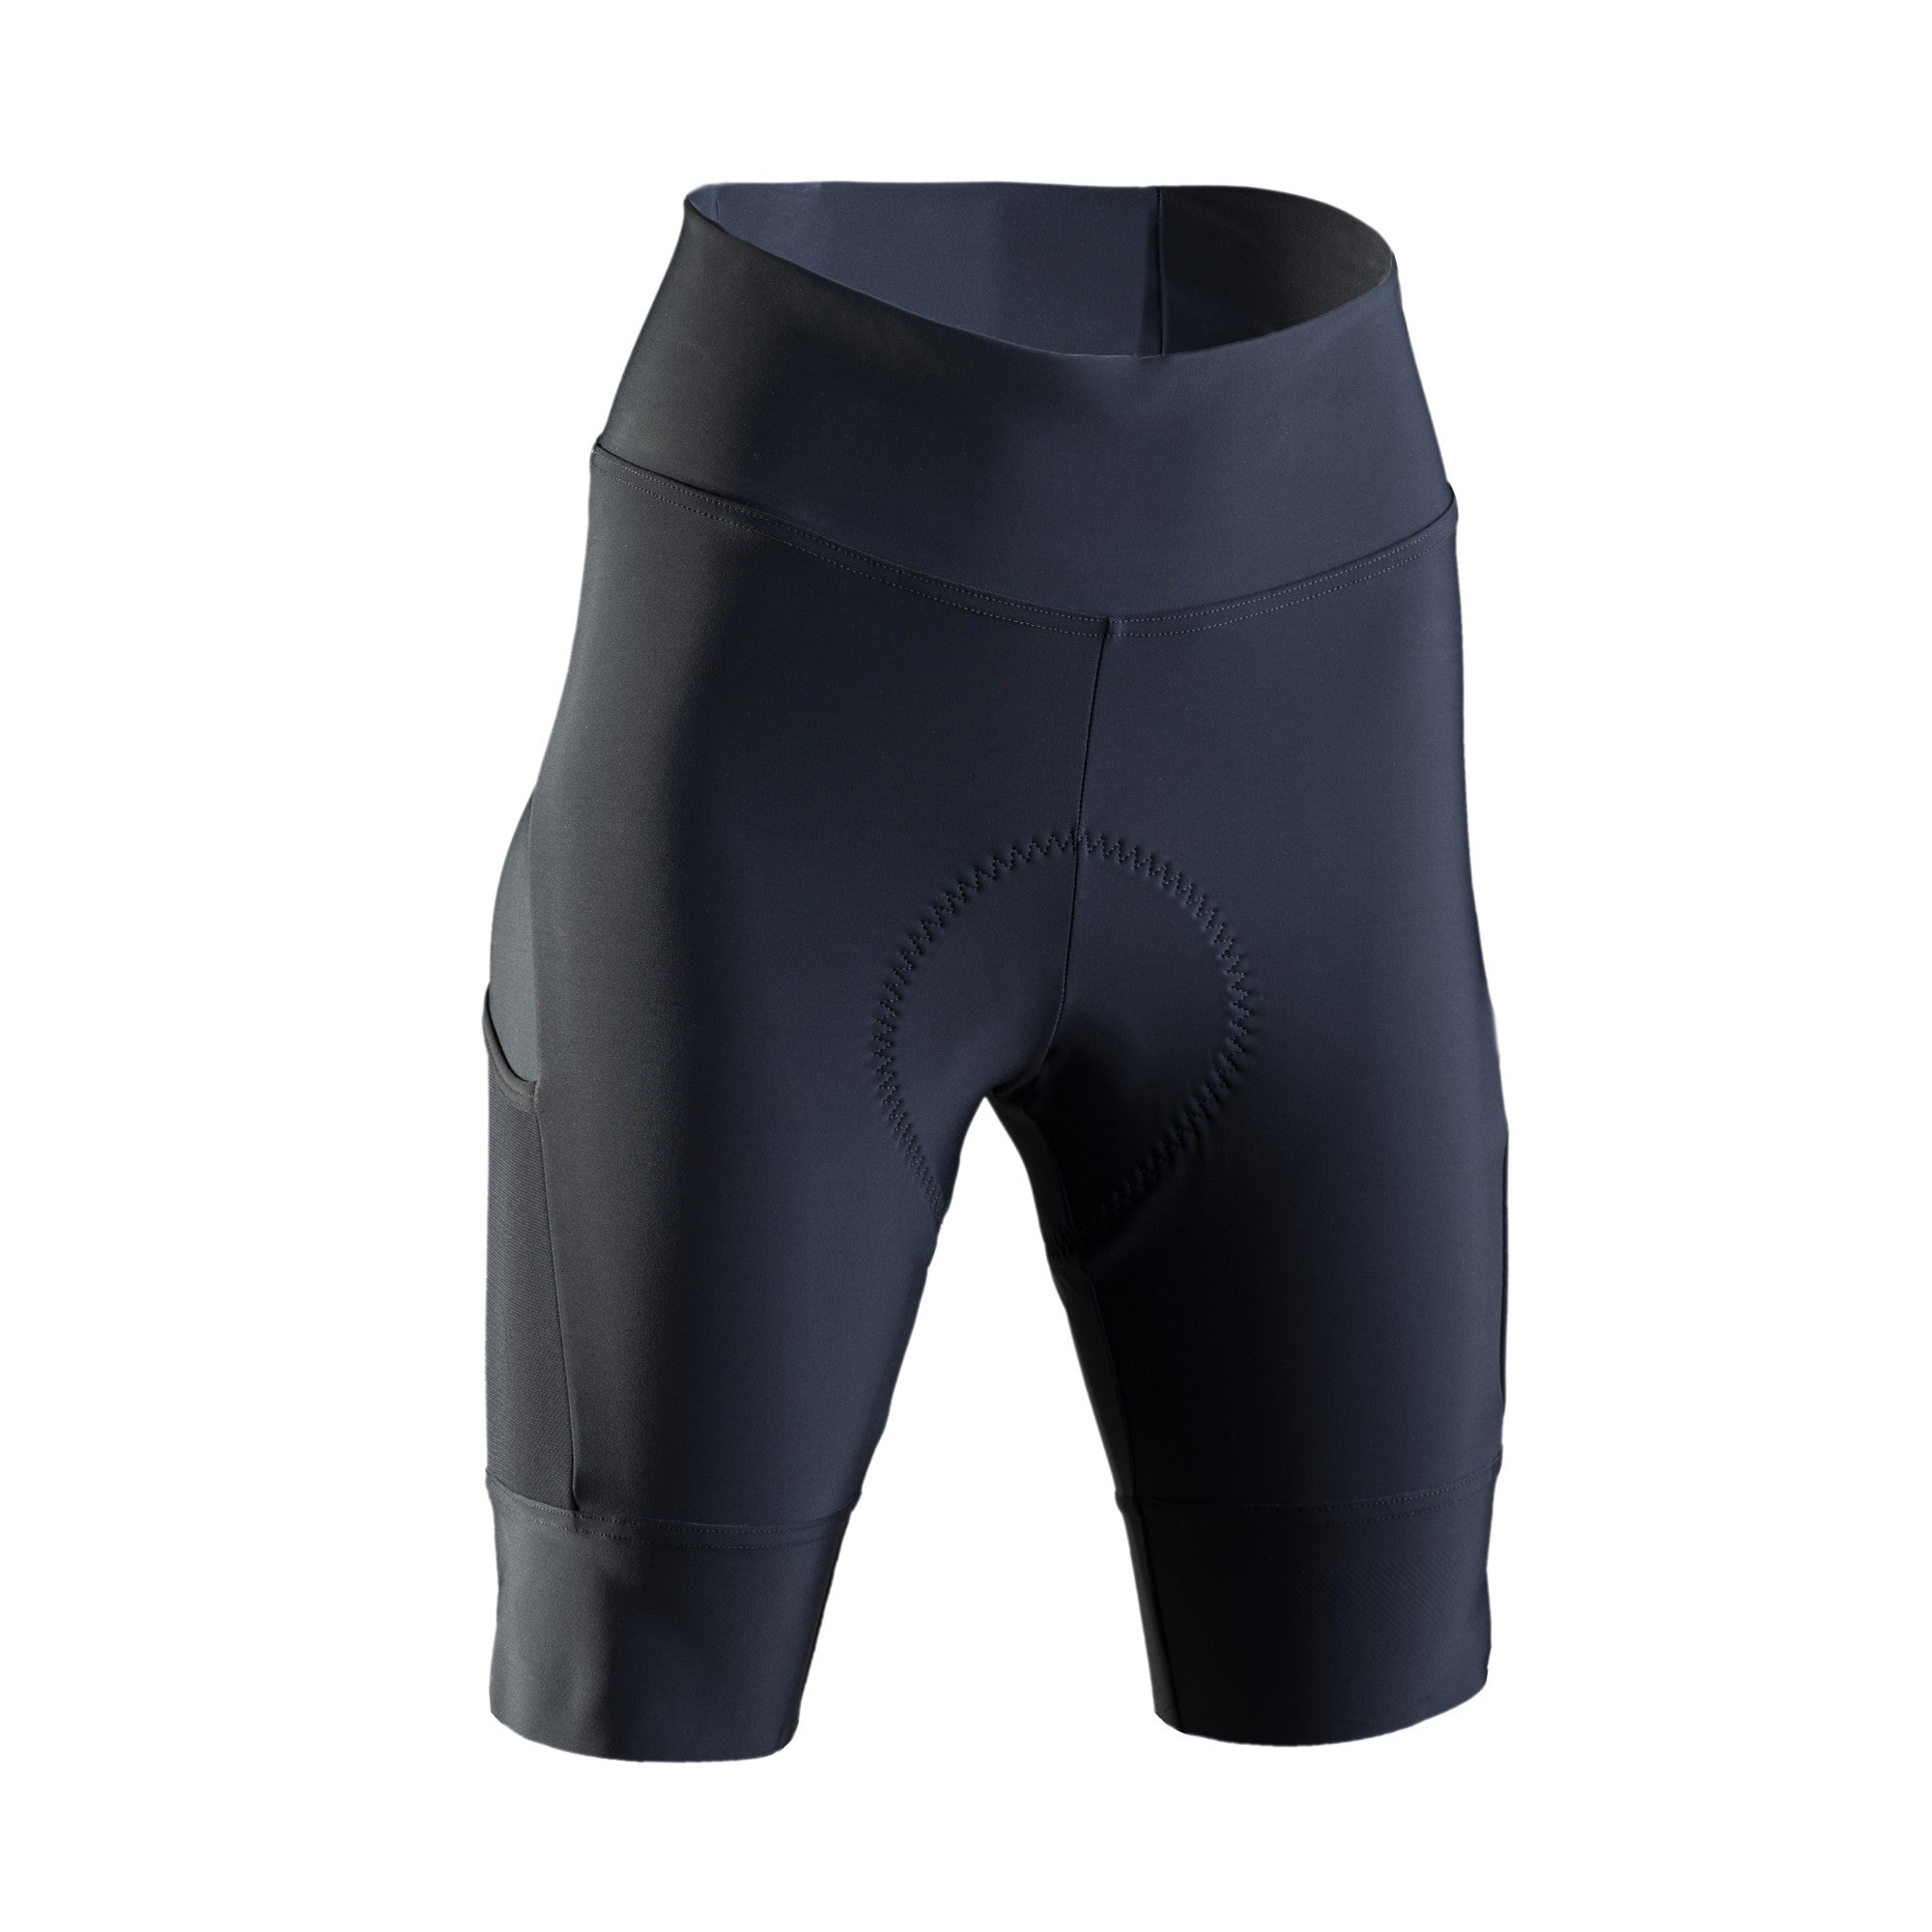 WOMANS SHORTS – Cinelli Official Americas